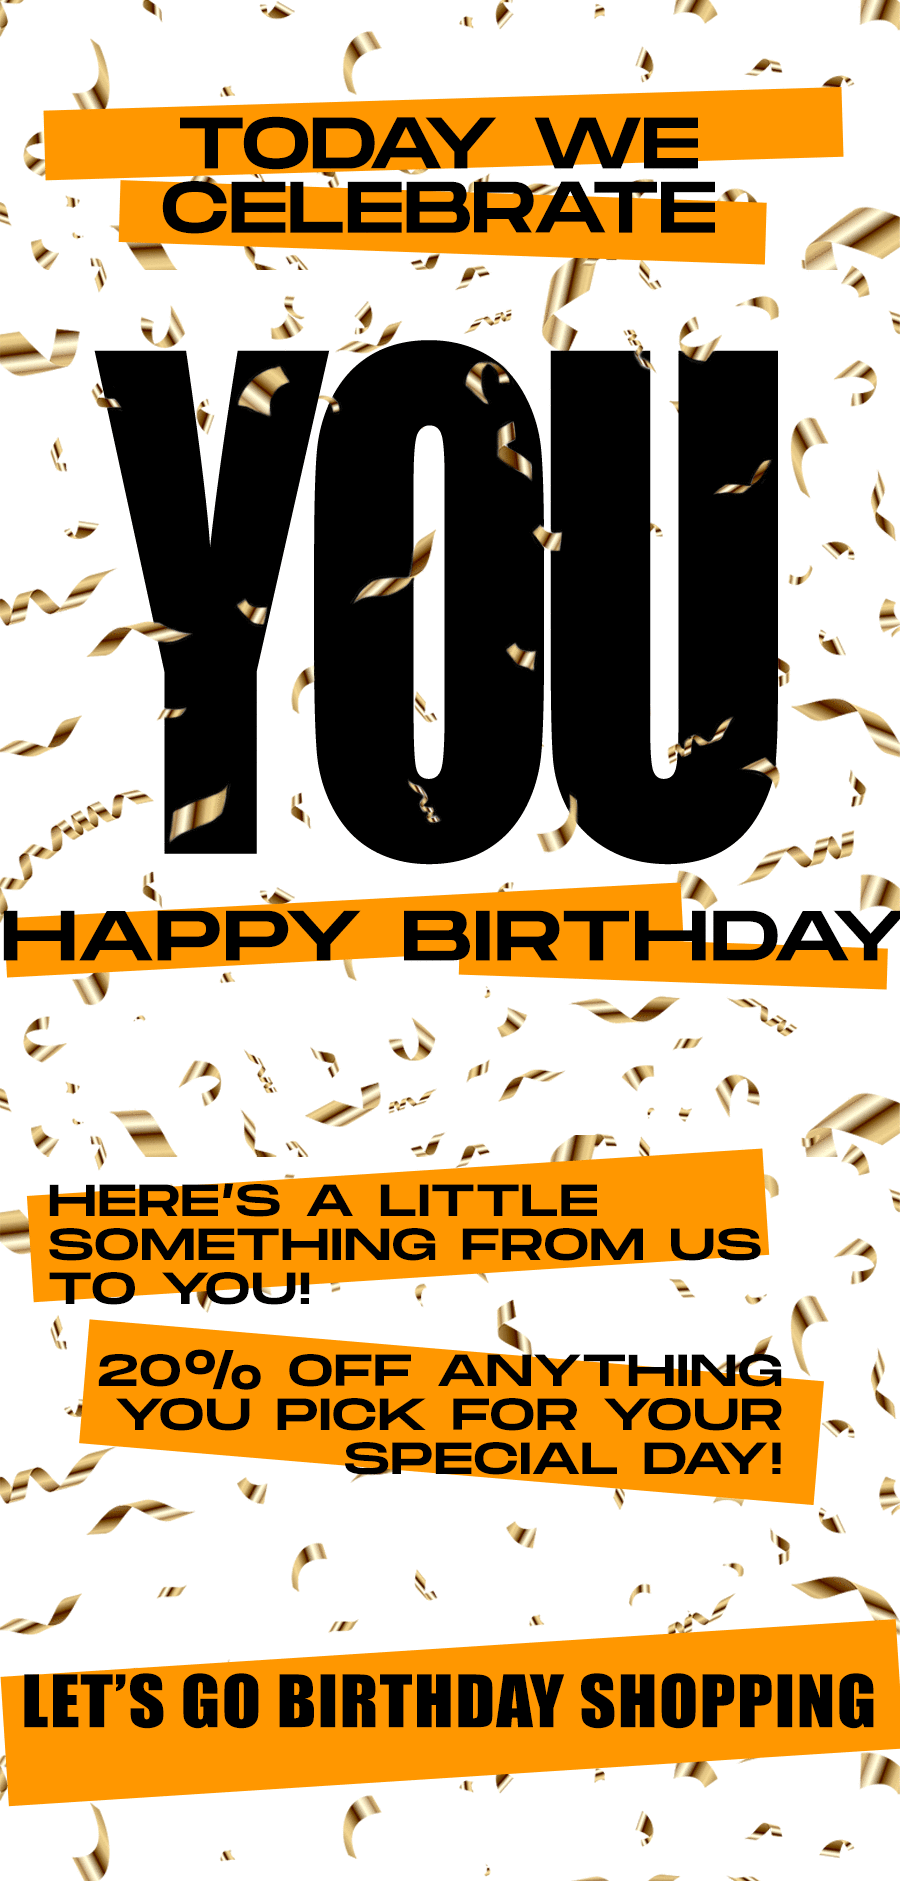 20% off for your birthday shopping!